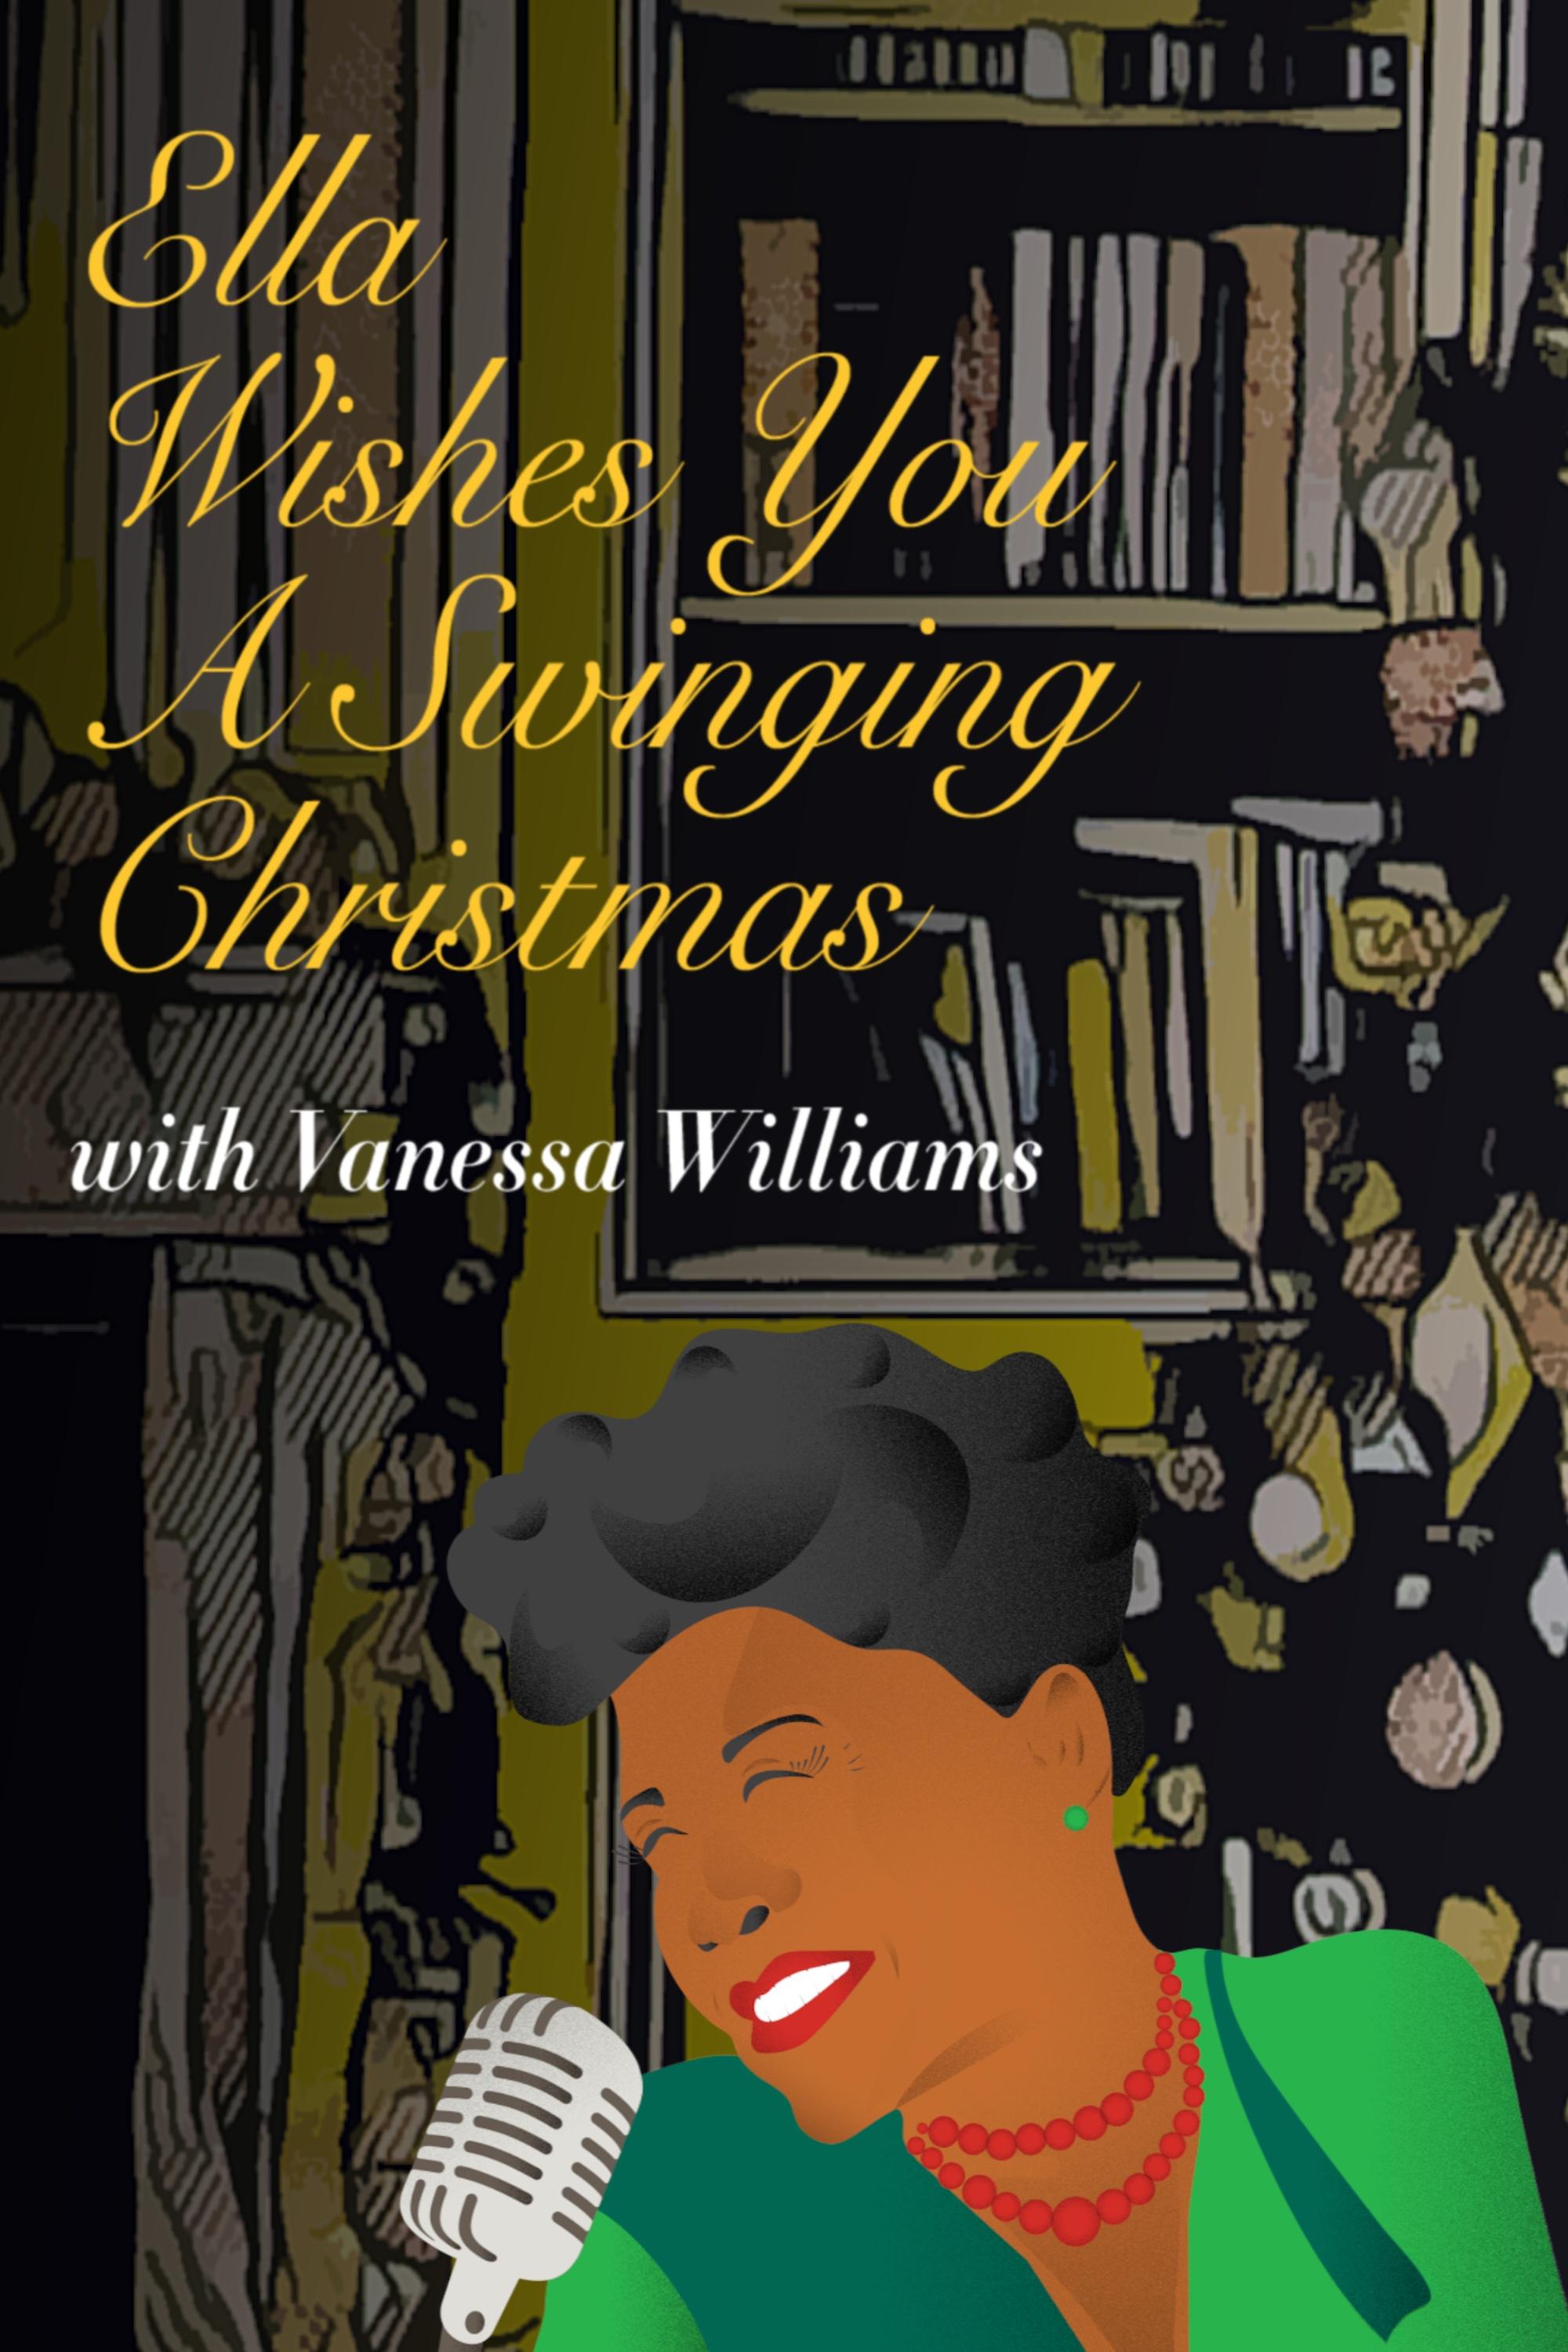 Ella Wishes You A Swingin' Christmas with Vanessa Williams